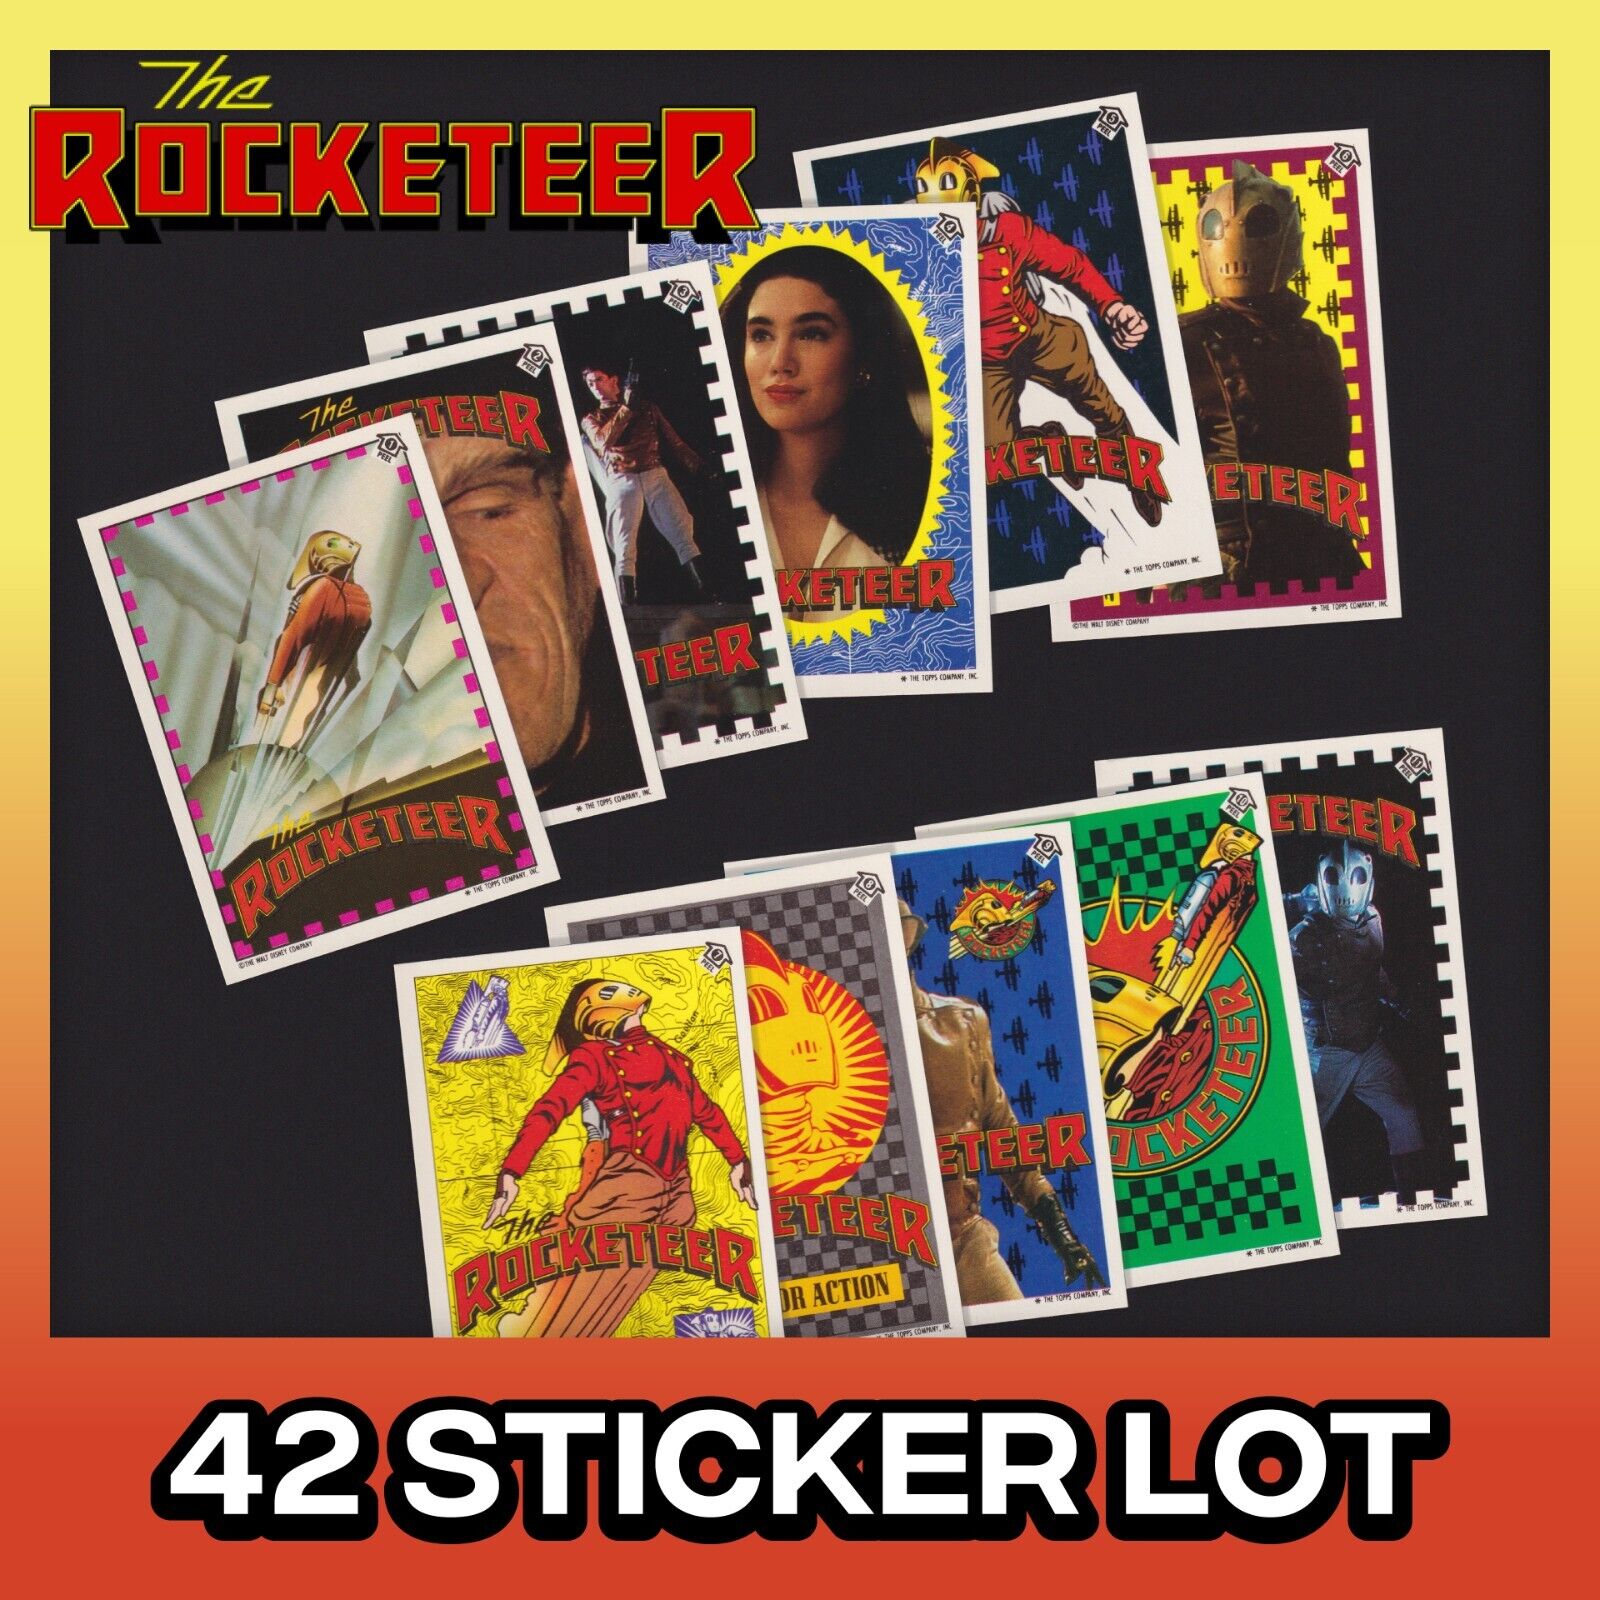 1991 Topps - The Rocketeer Movie - 42 Sticker Lot *BUNDLE*